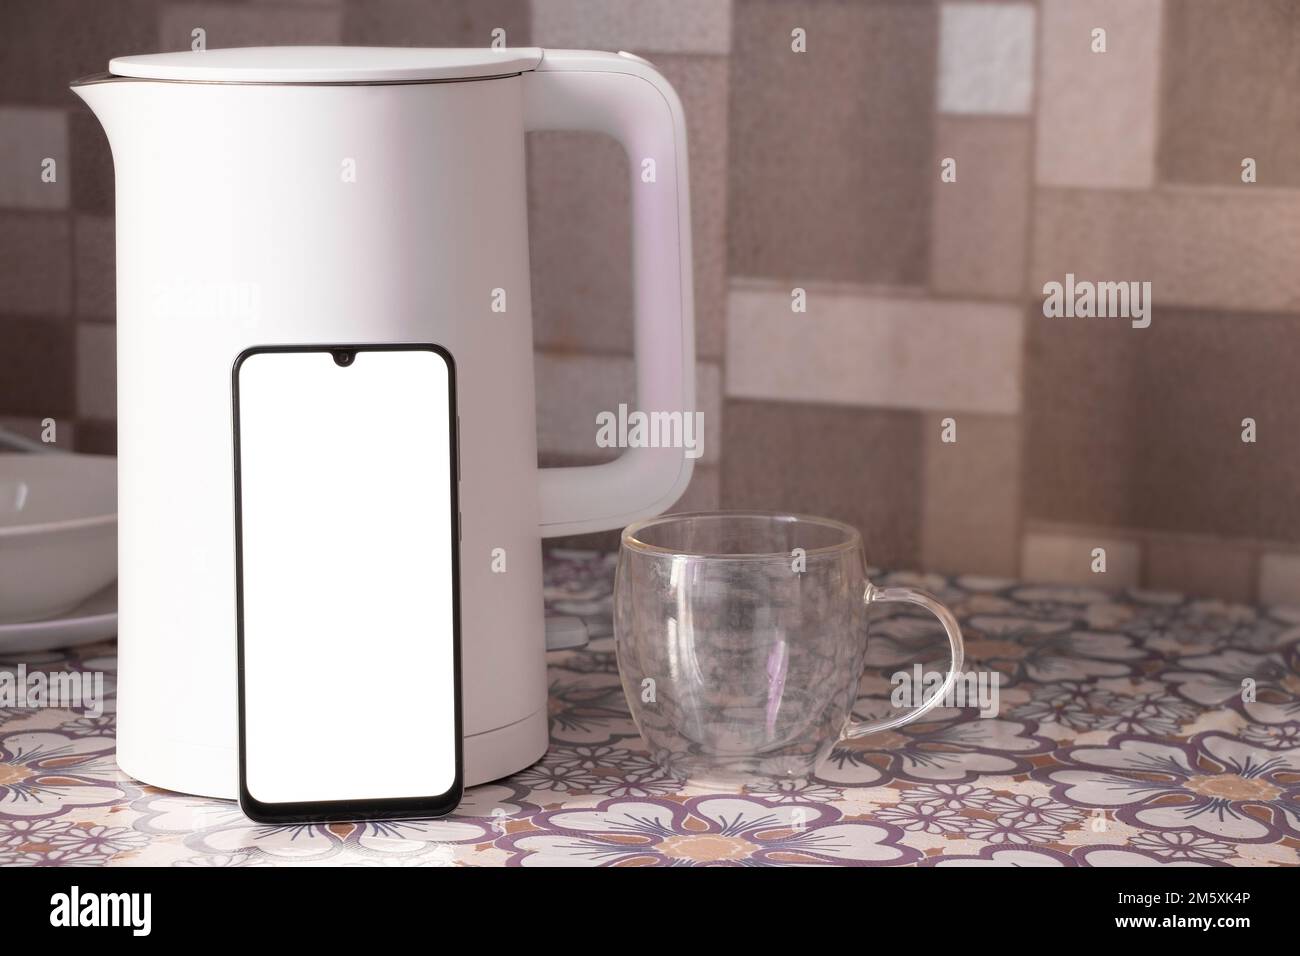 a phone with a blank white screen stands near a white teapot and a cup on the kitchen table Stock Photo